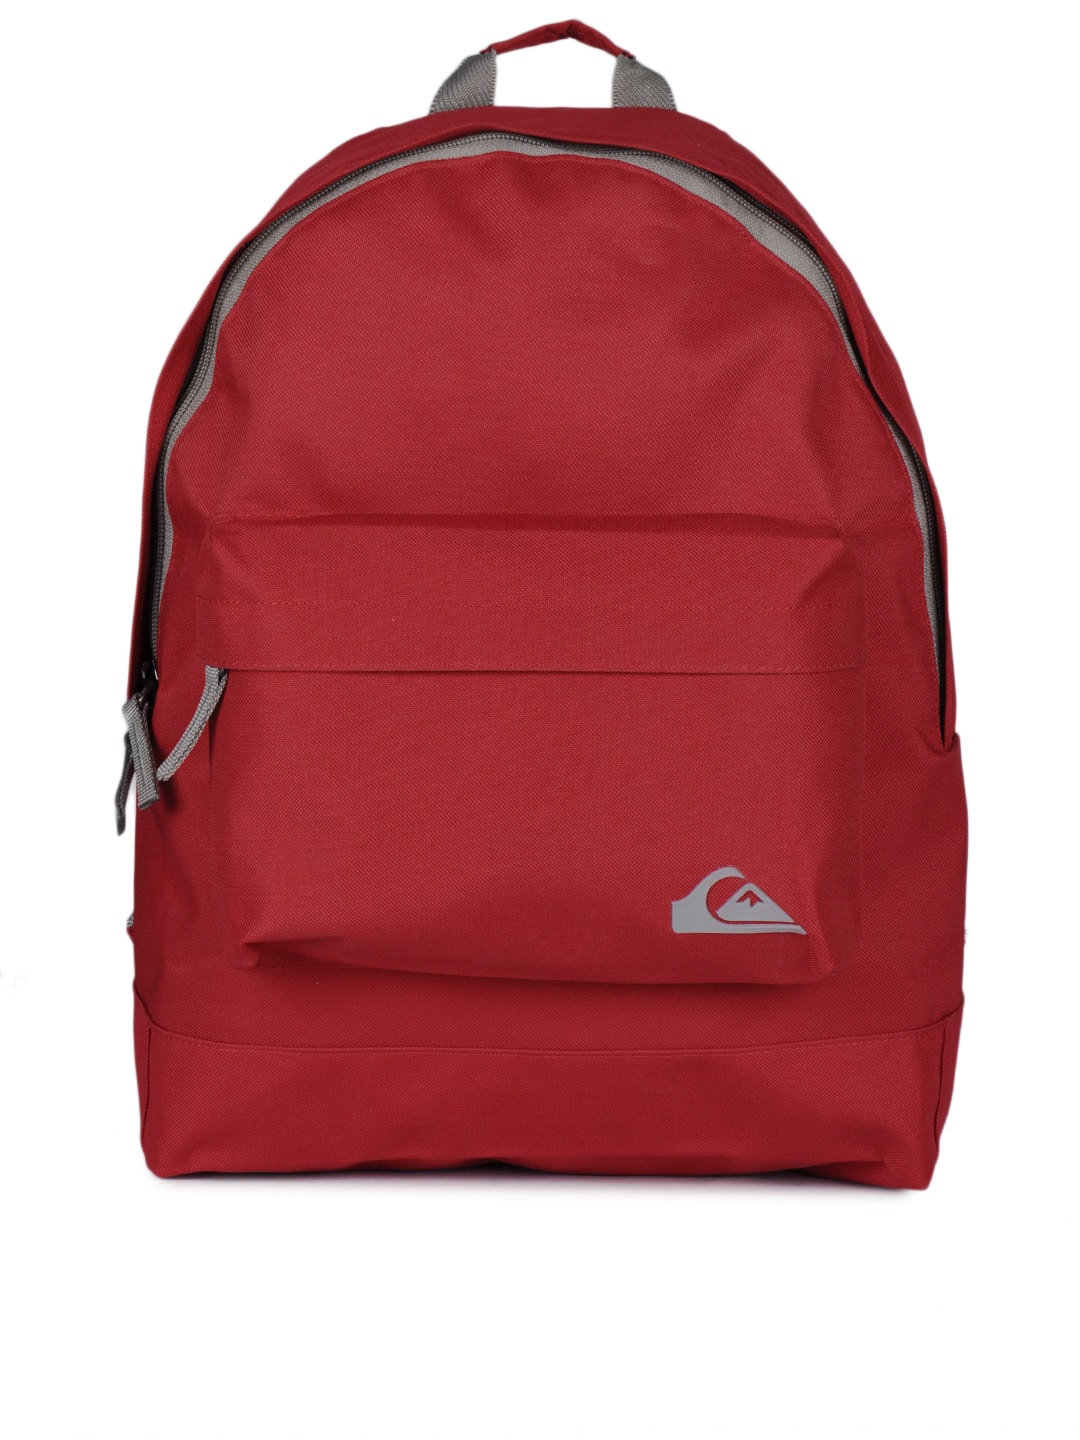 Quiksilver Unisex Red Backpack